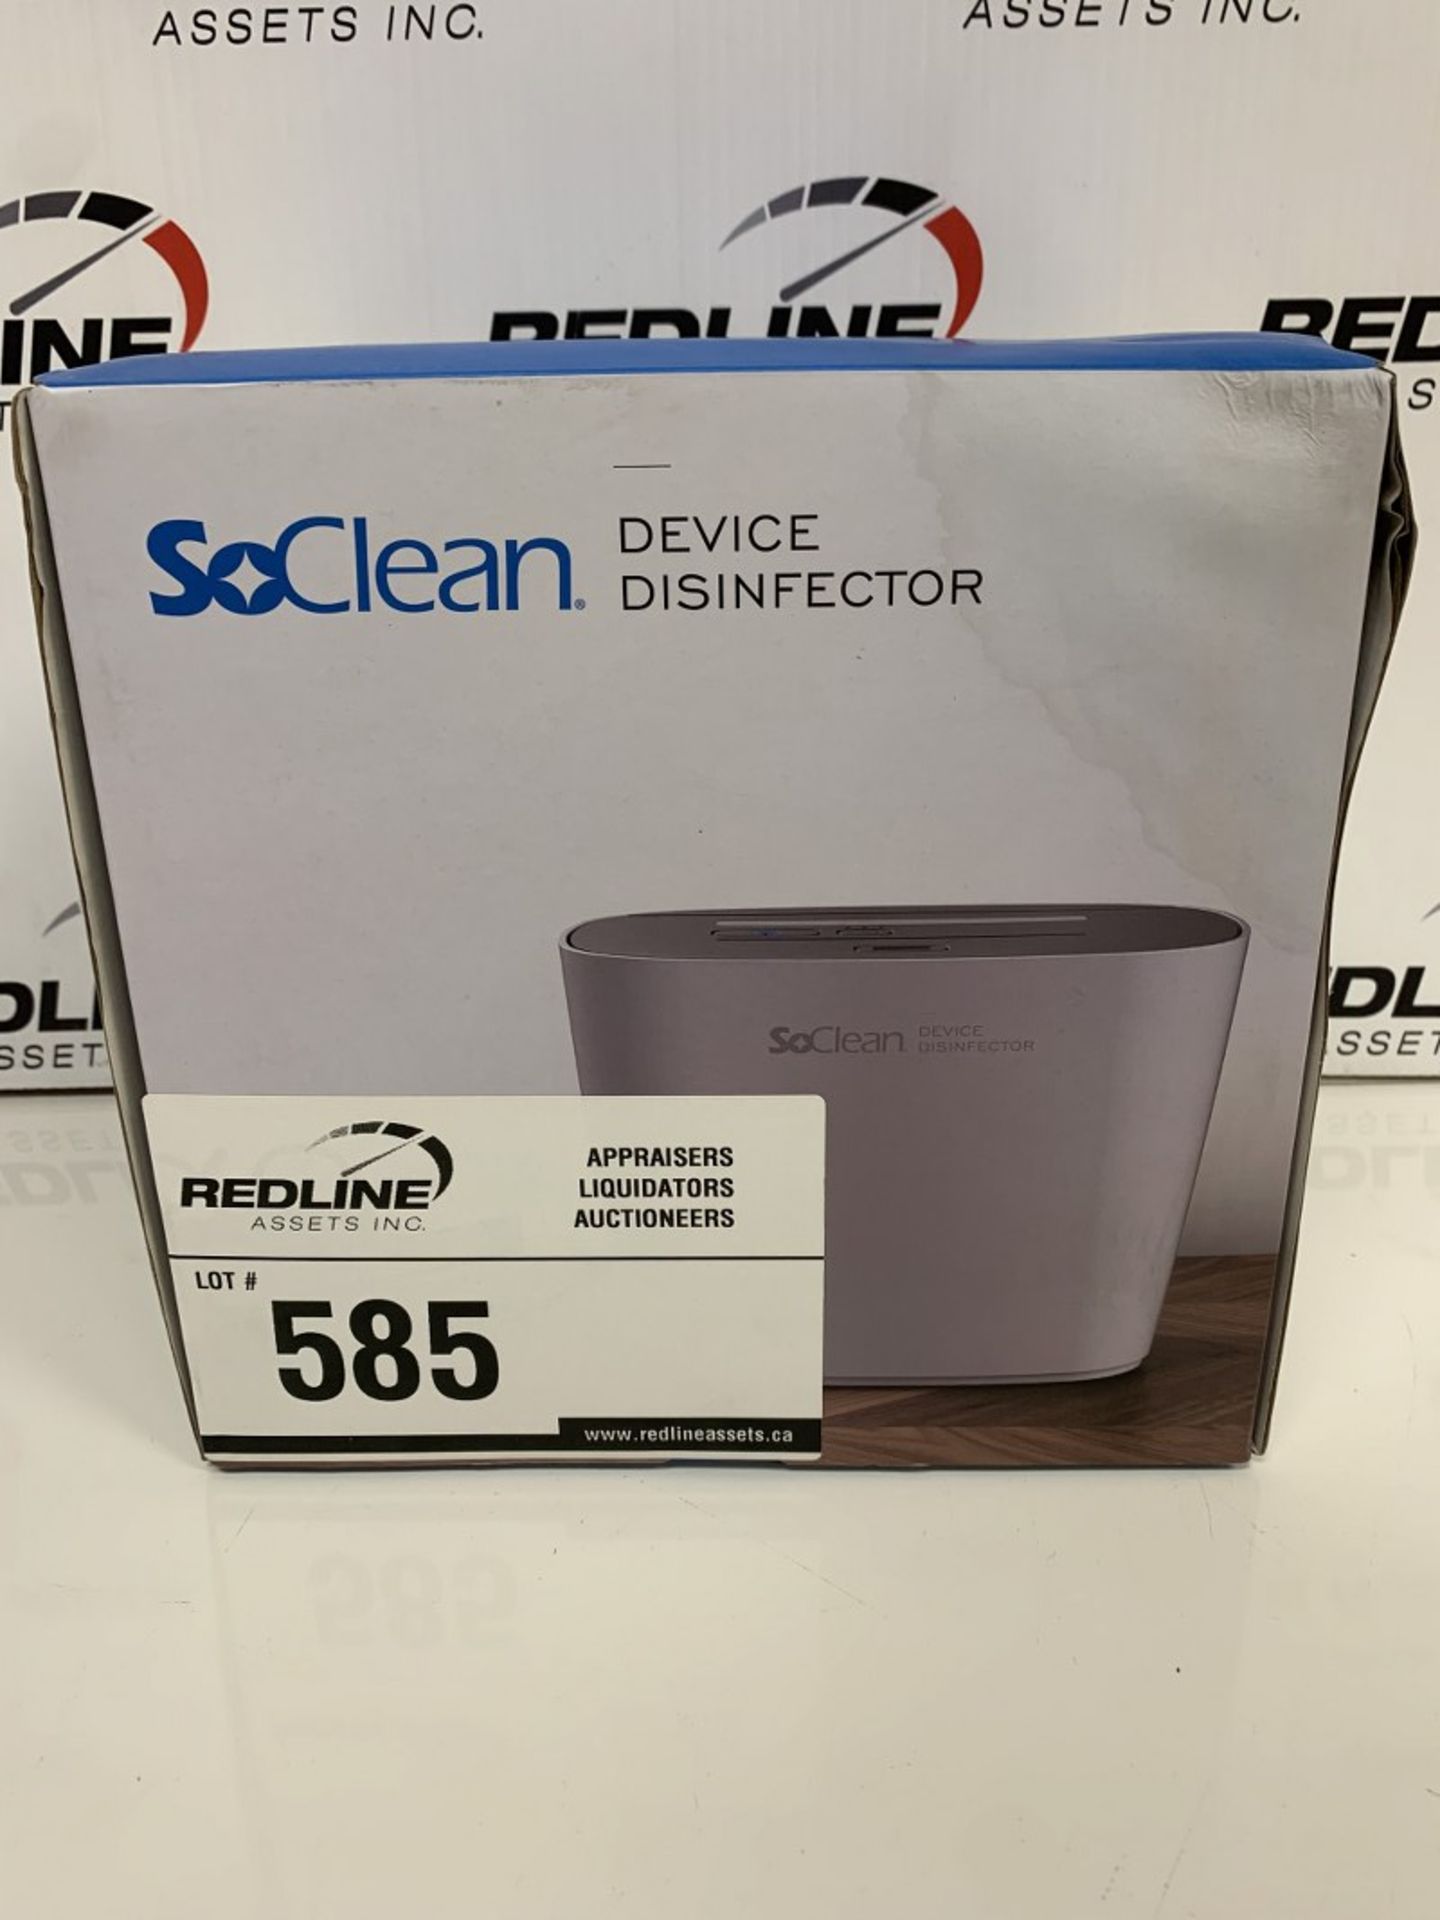 So Clean - Device Disinfector